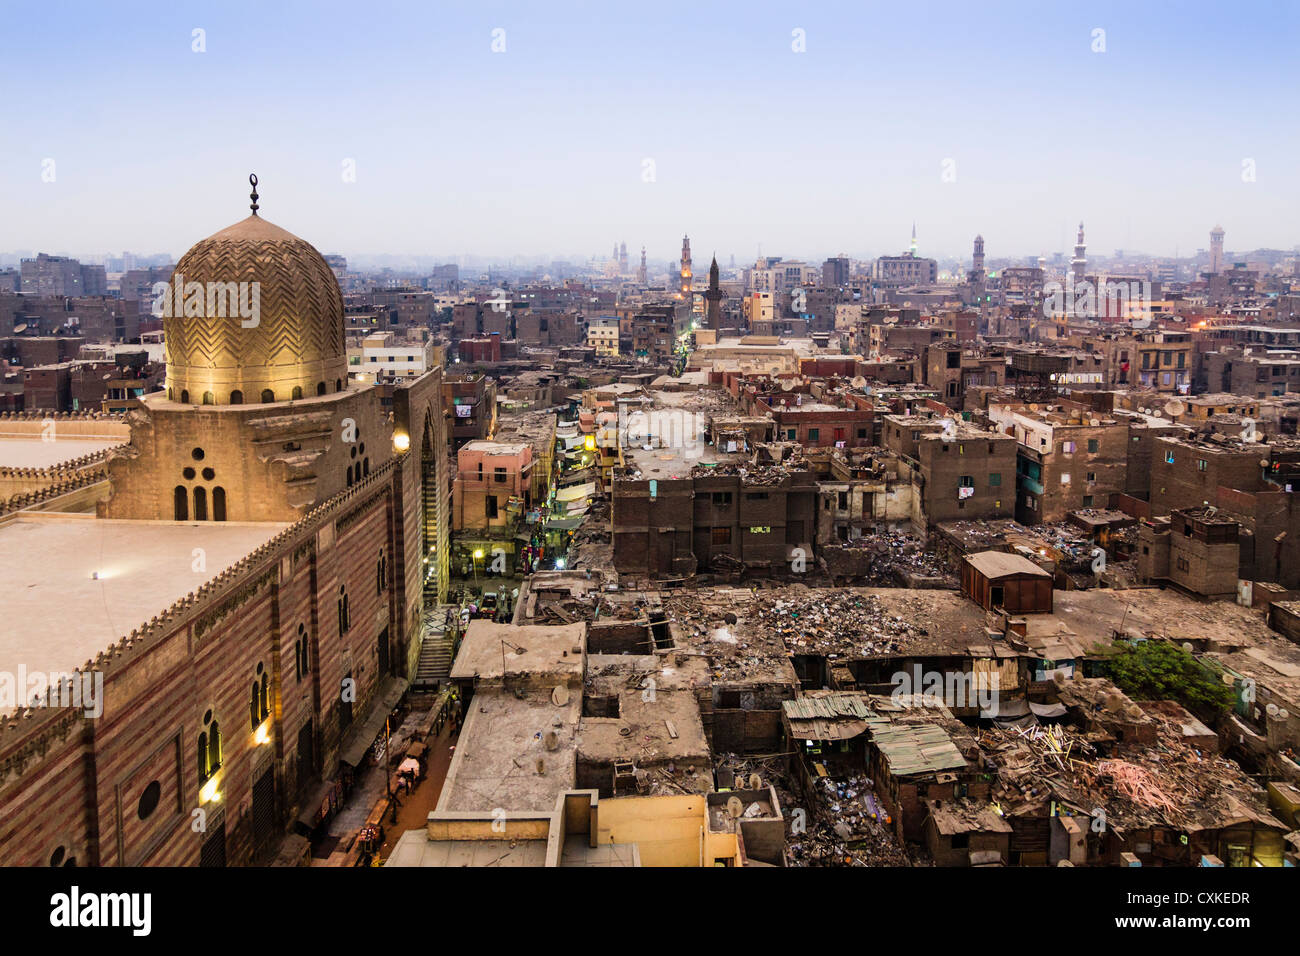 Overview of Islamic Cairo with Mosque of Sultan al-Muayyad and derelict roof buildings. Cairo, Egypt Stock Photo